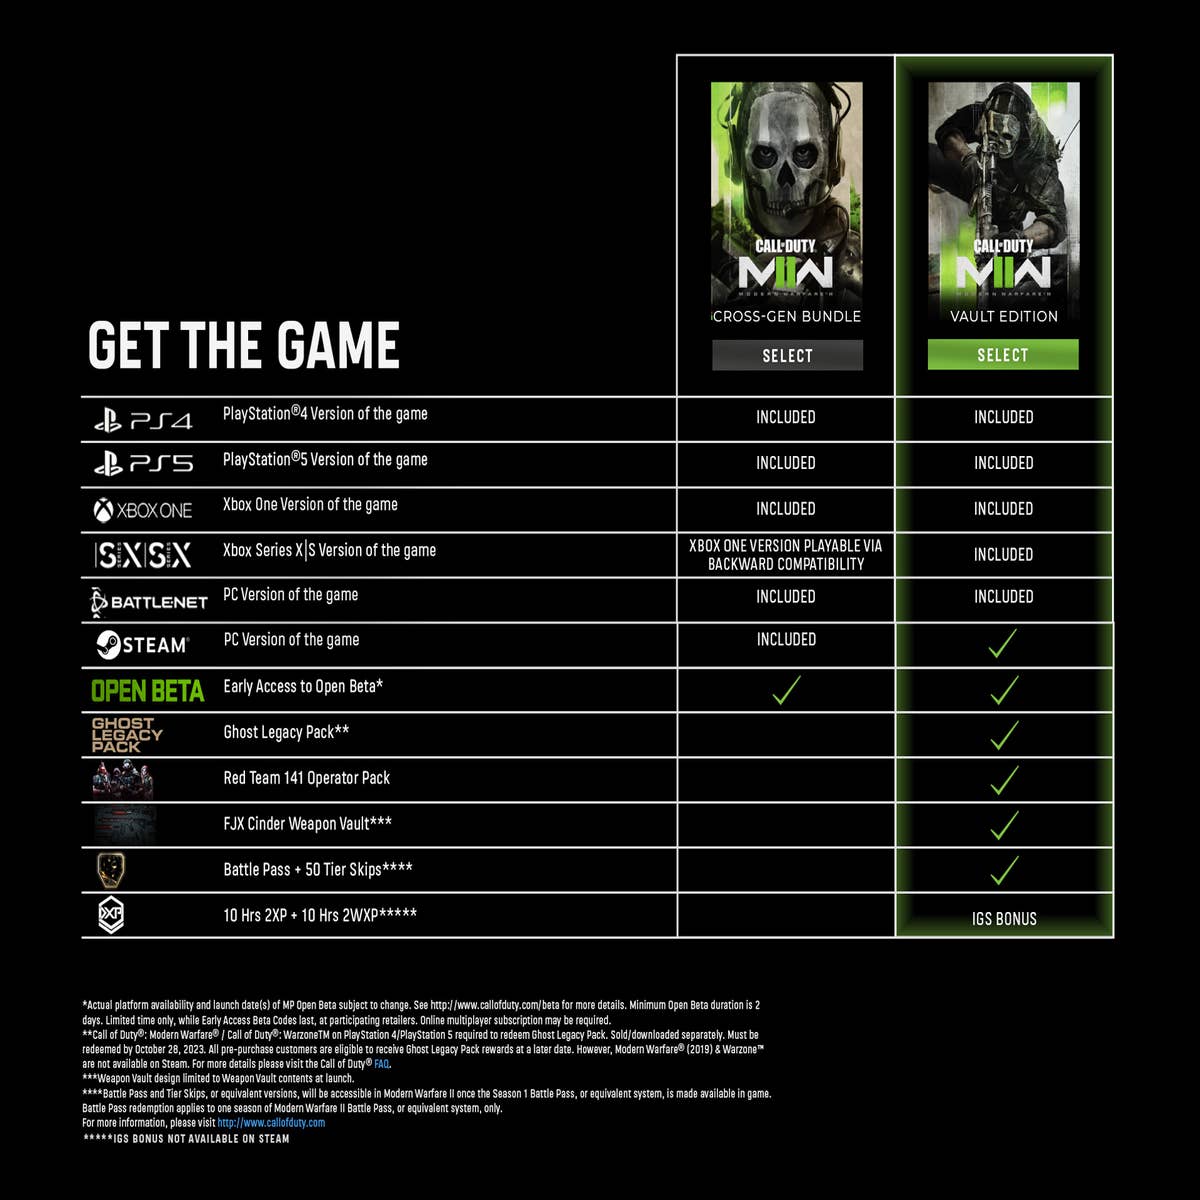 Call Of Duty Modern Warfare 2 PC Requirements REVEALED - Full MW2